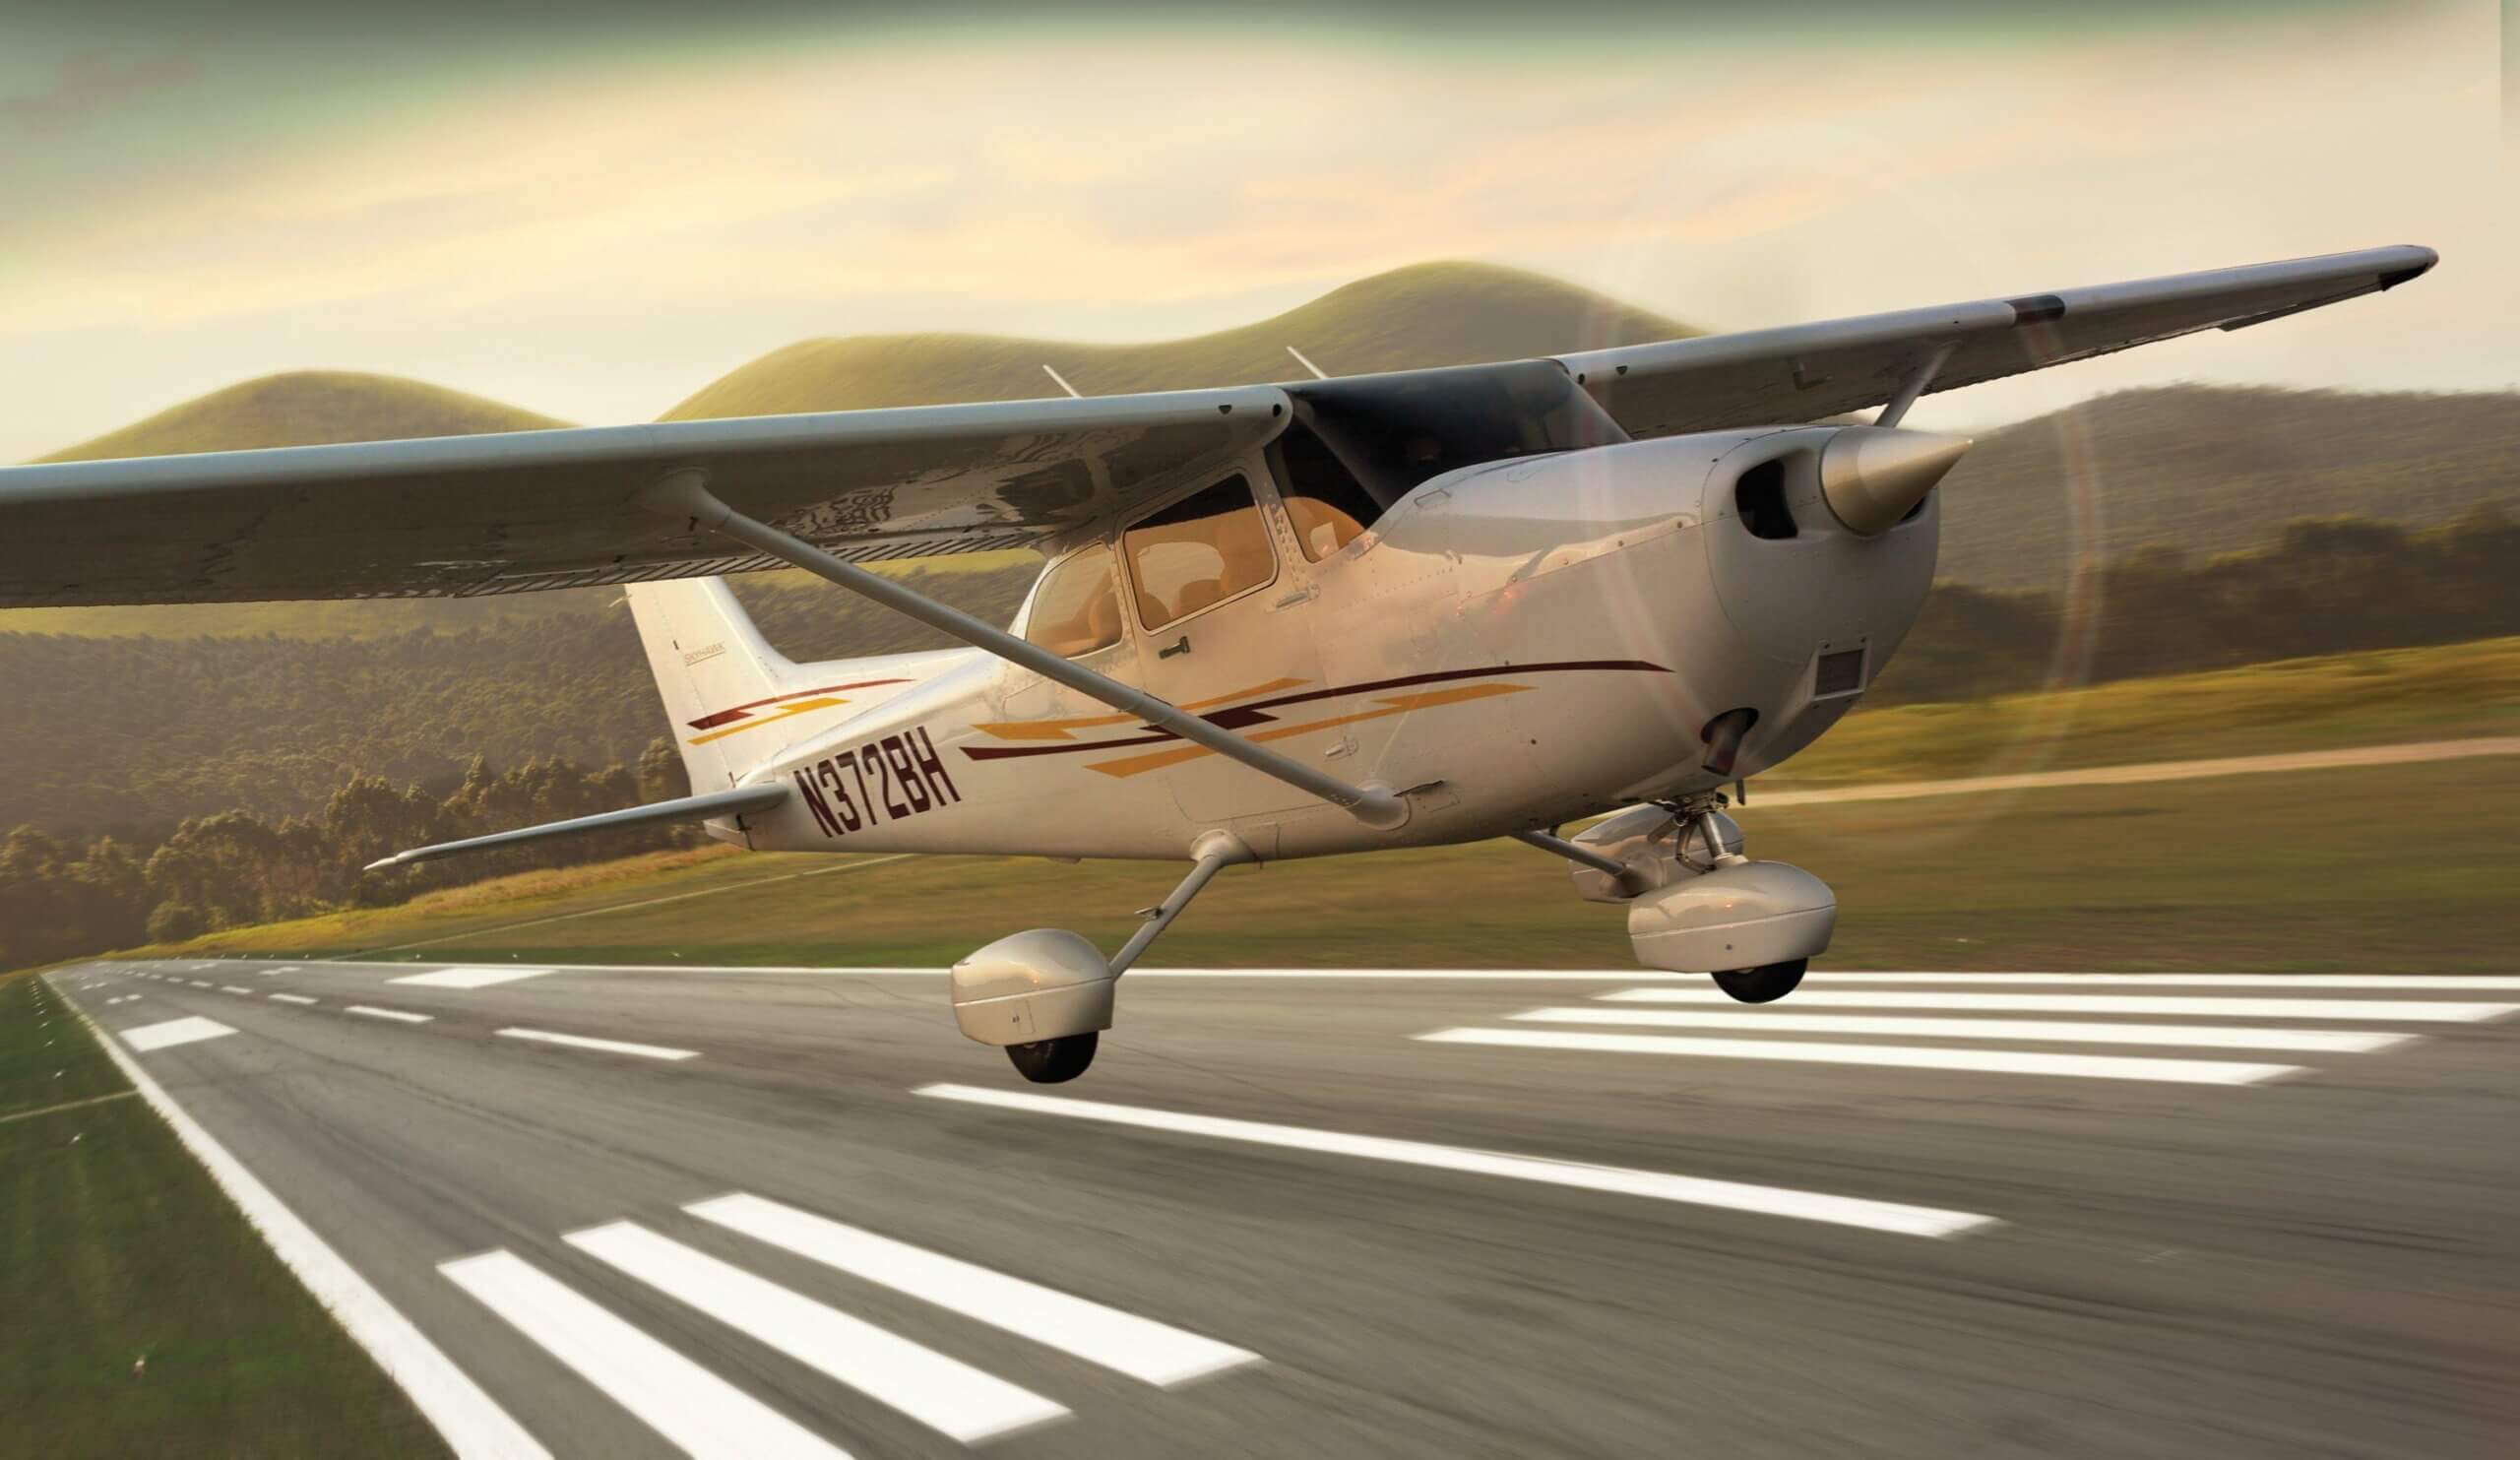 learn everything about the Cessna aircraft - E3 Aviation